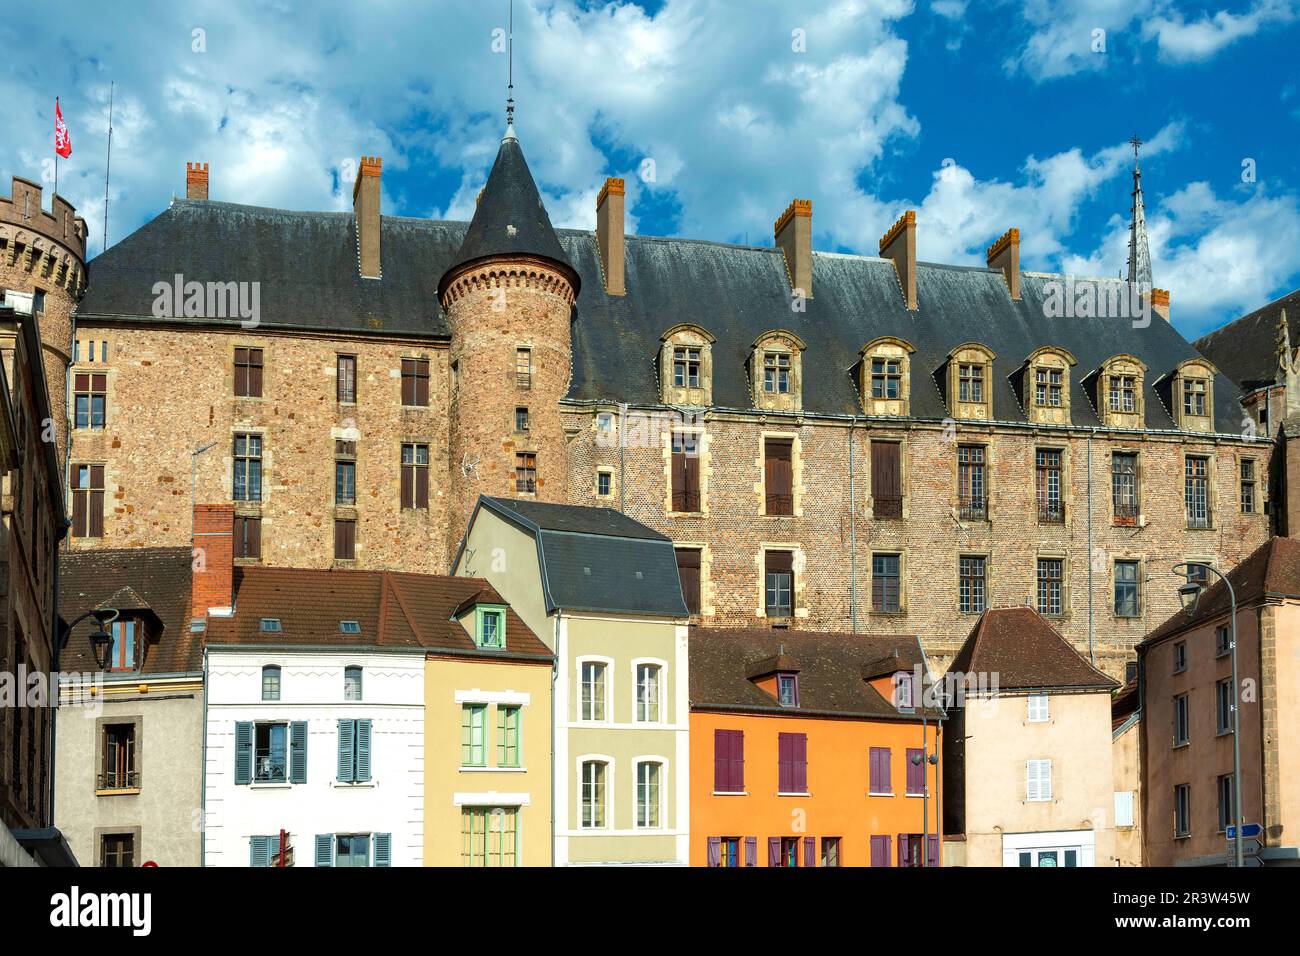 Lapalisse. Chateau de la Palice residence of the famous Marshal of France. Allier department. Auvergne Rhone Alpes. France Stock Photo